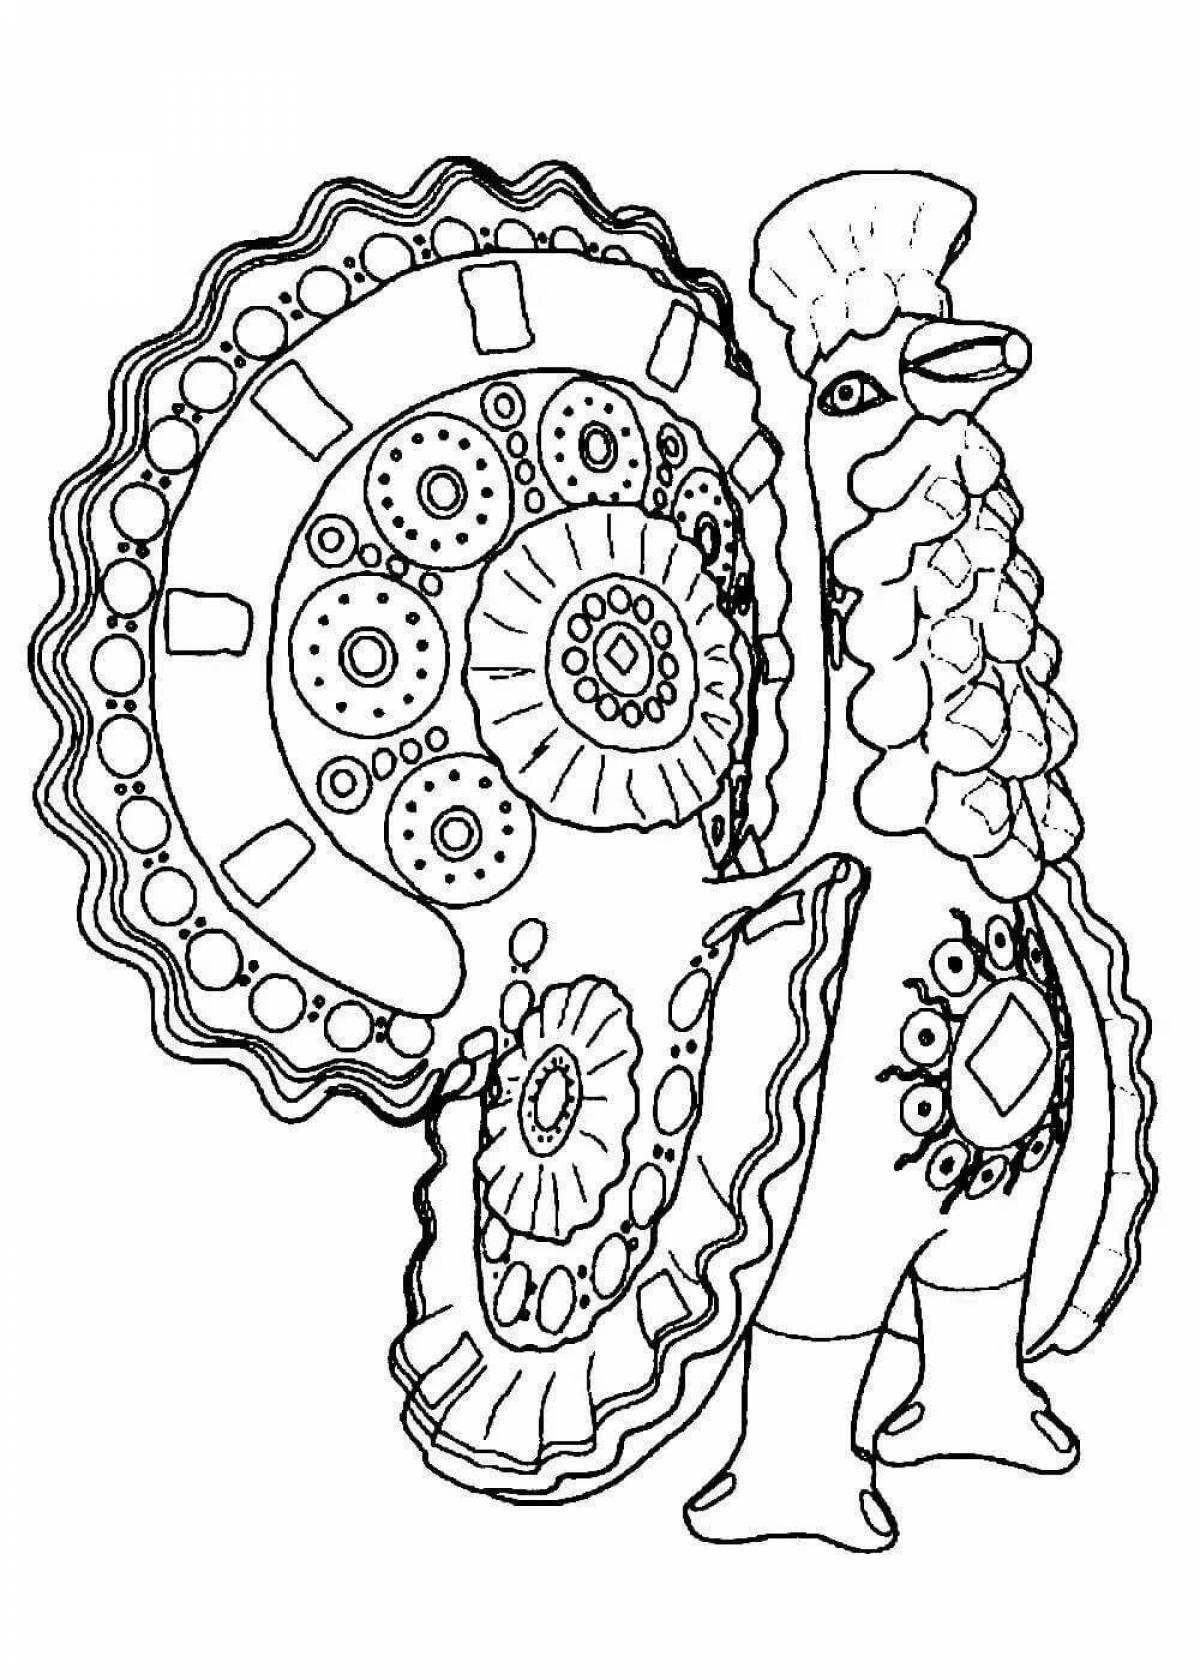 Adorable Dymkovo turkey coloring pages for kids